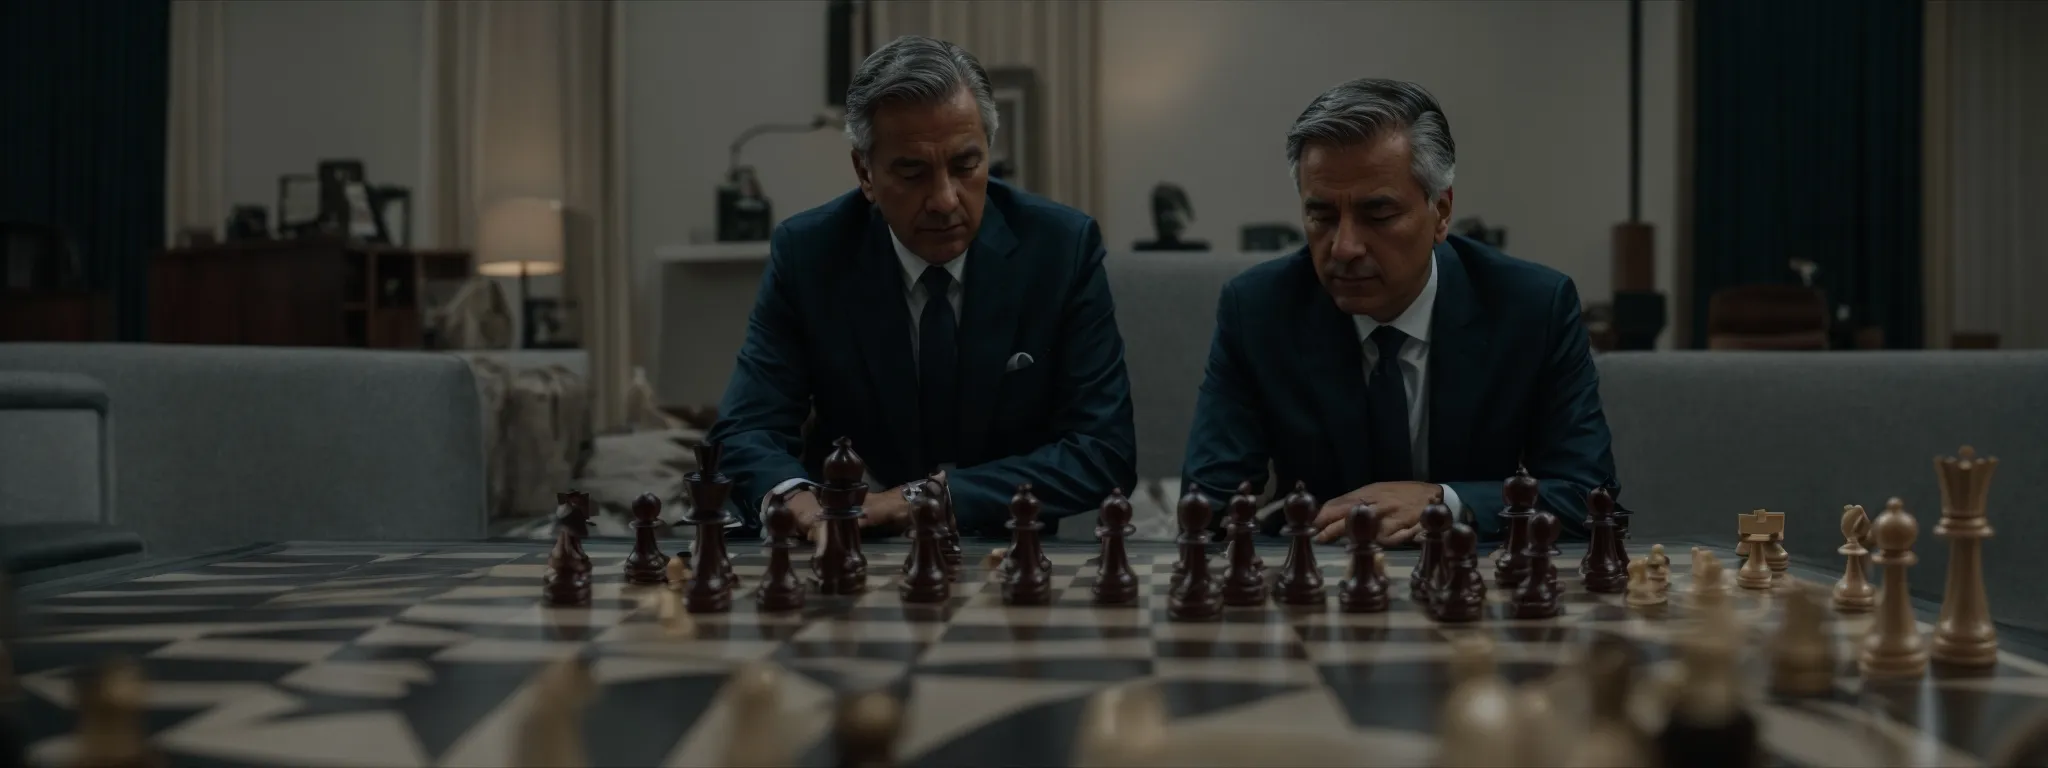 two businessmen examining a large chessboard, pondering their next strategic move.